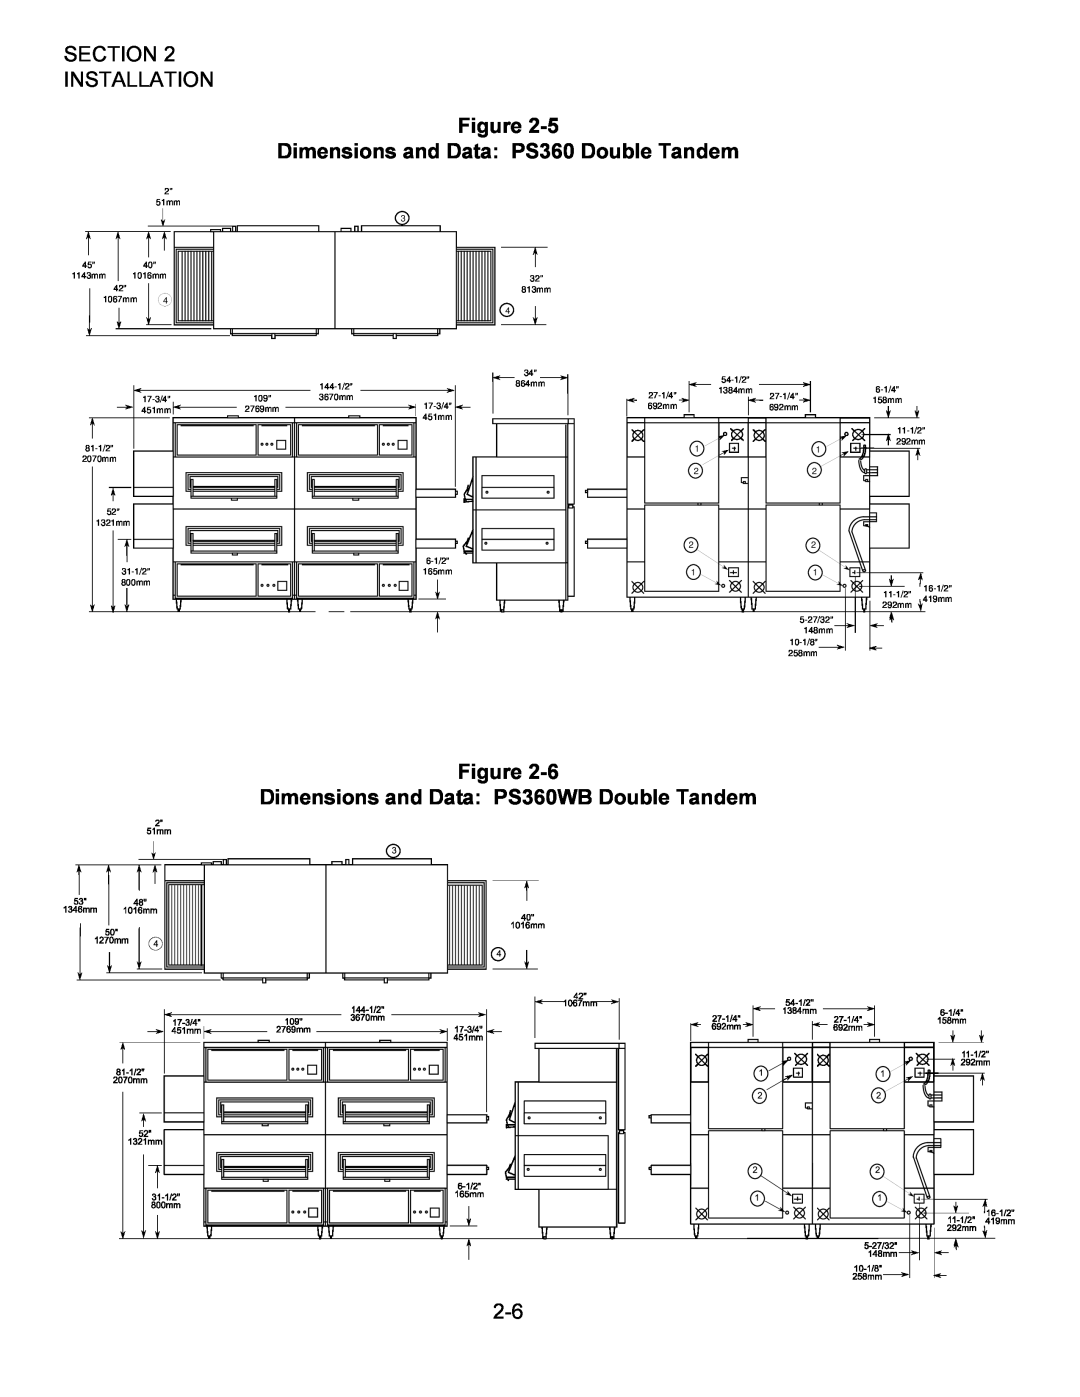 Middleby Marshall Oven owner manual Dimensions and Data PS360 Double Tandem, Dimensions and Data PS360WB Double Tandem 